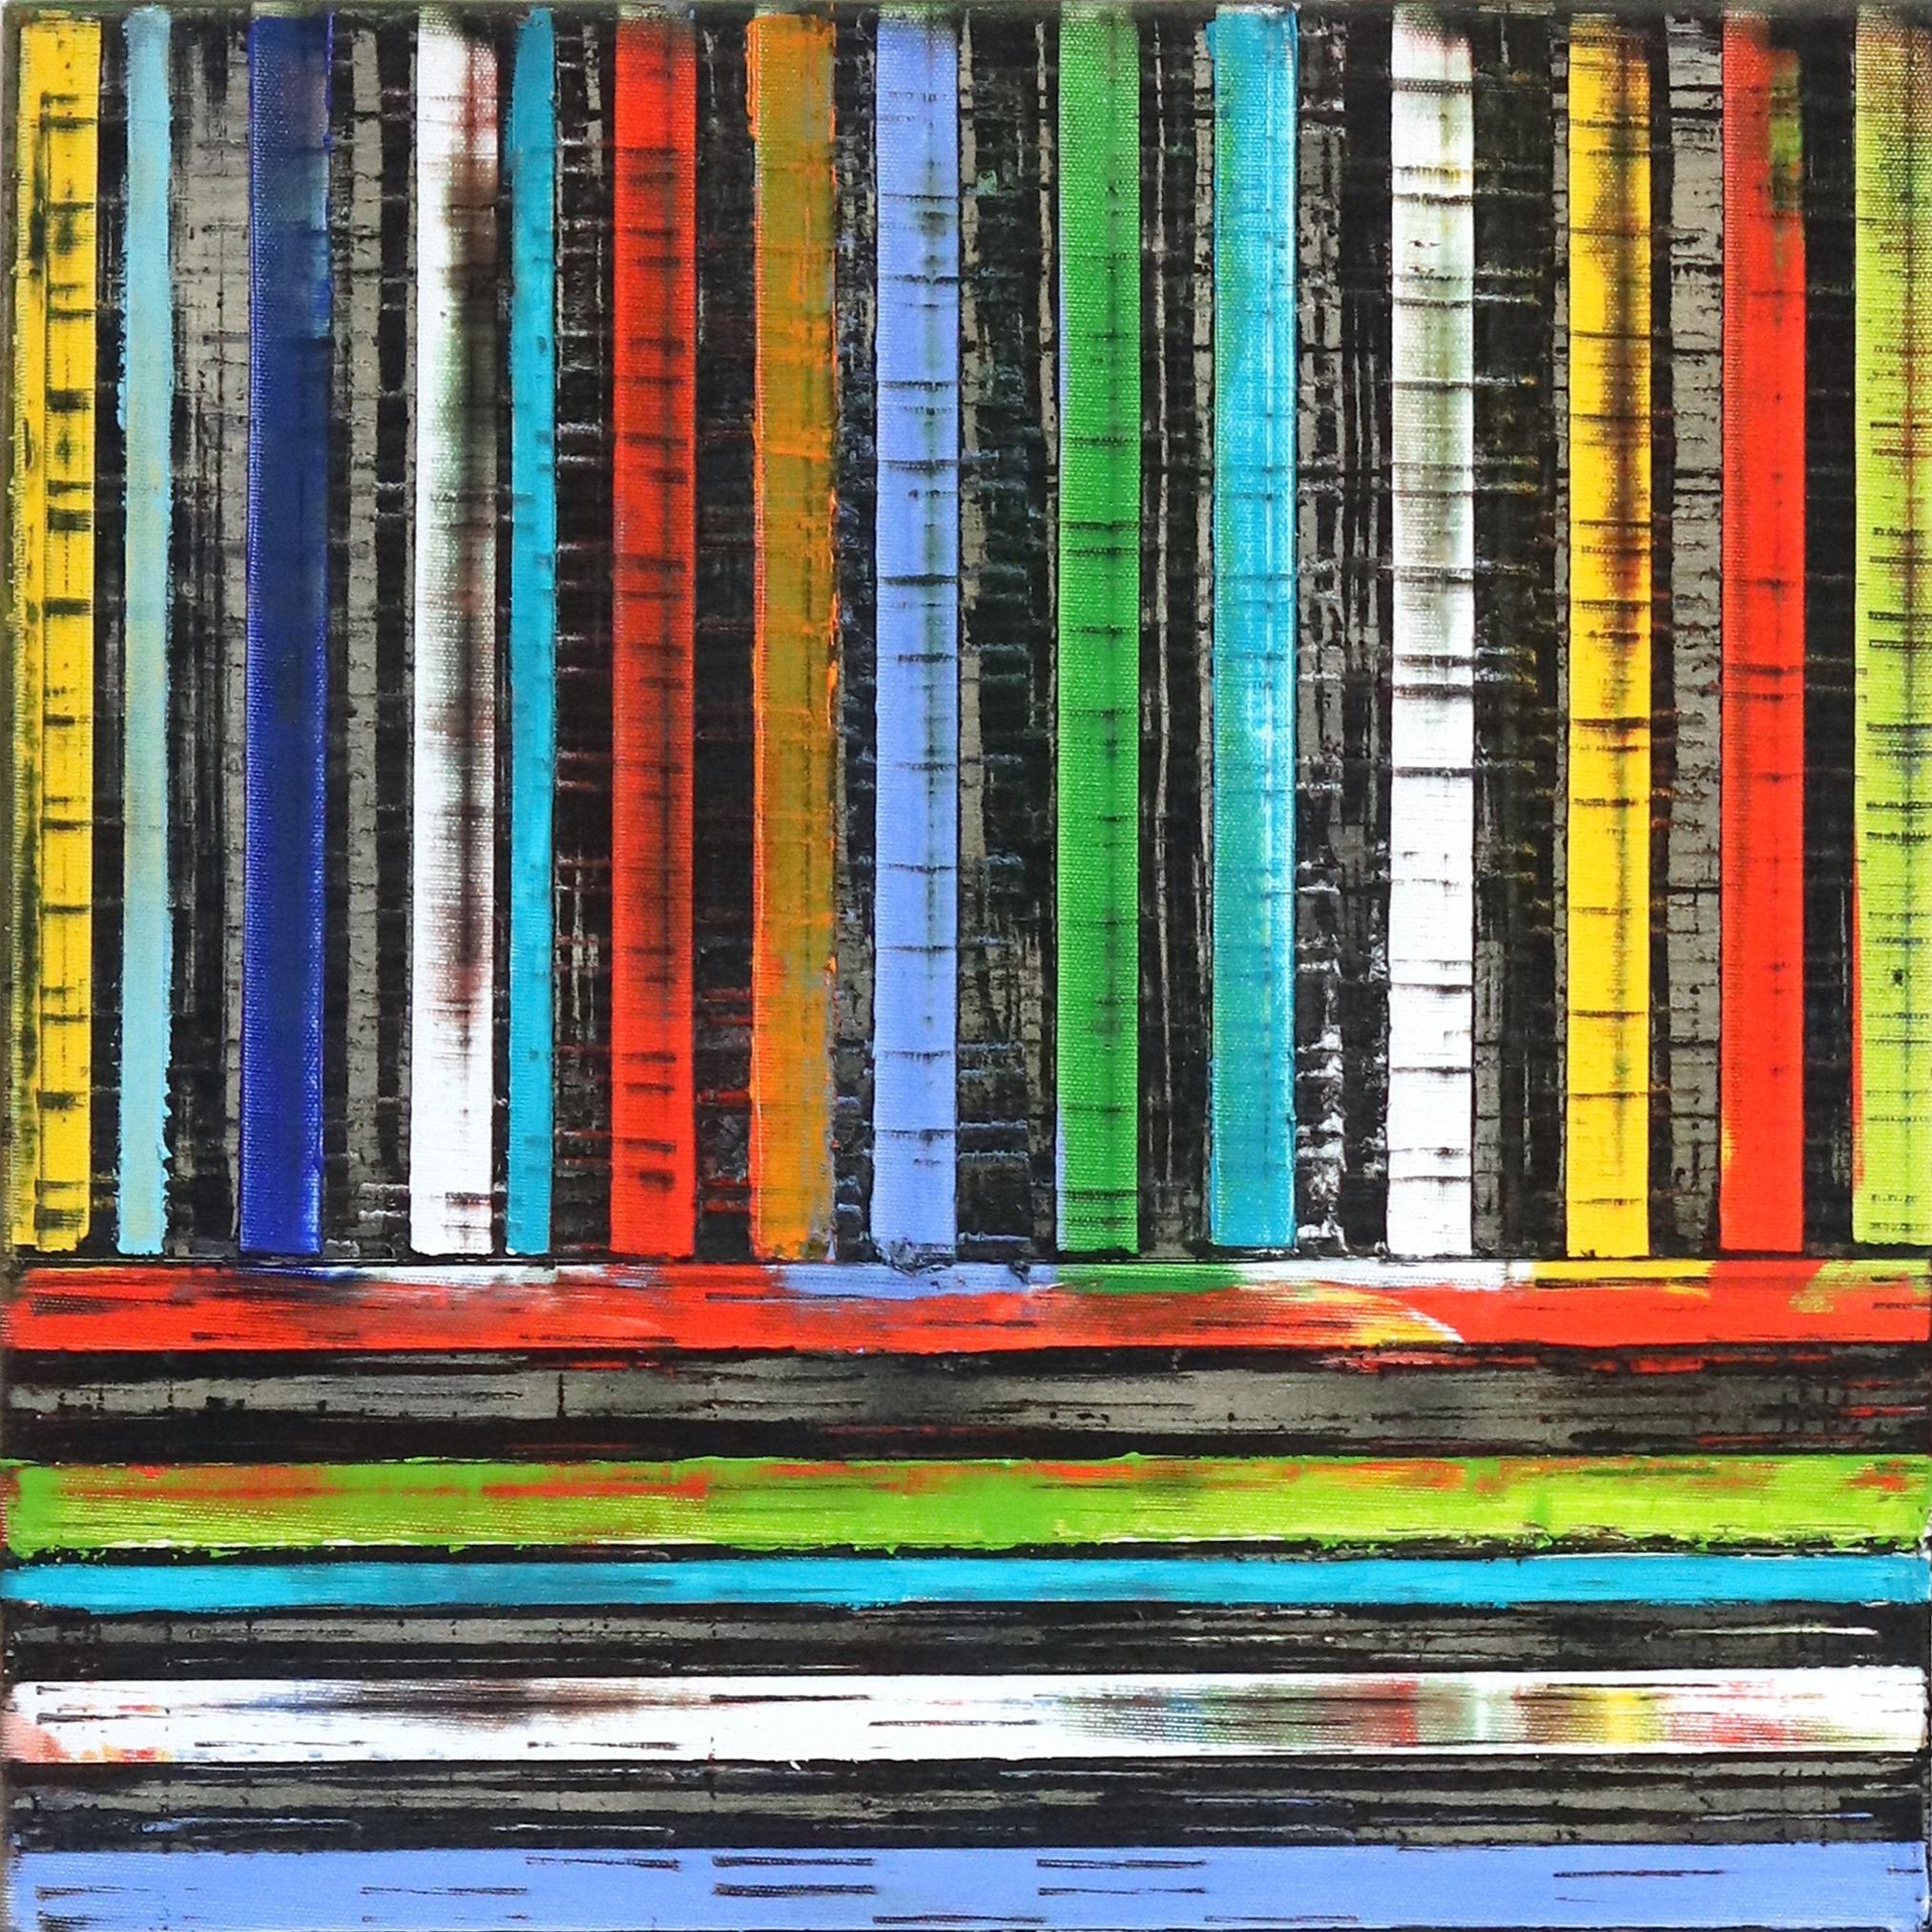 Stripes In Rainbow - Original Colorful Oil Painting Patterned Stripes Texture - Abstract Mixed Media Art by Petra Rös-Nickel